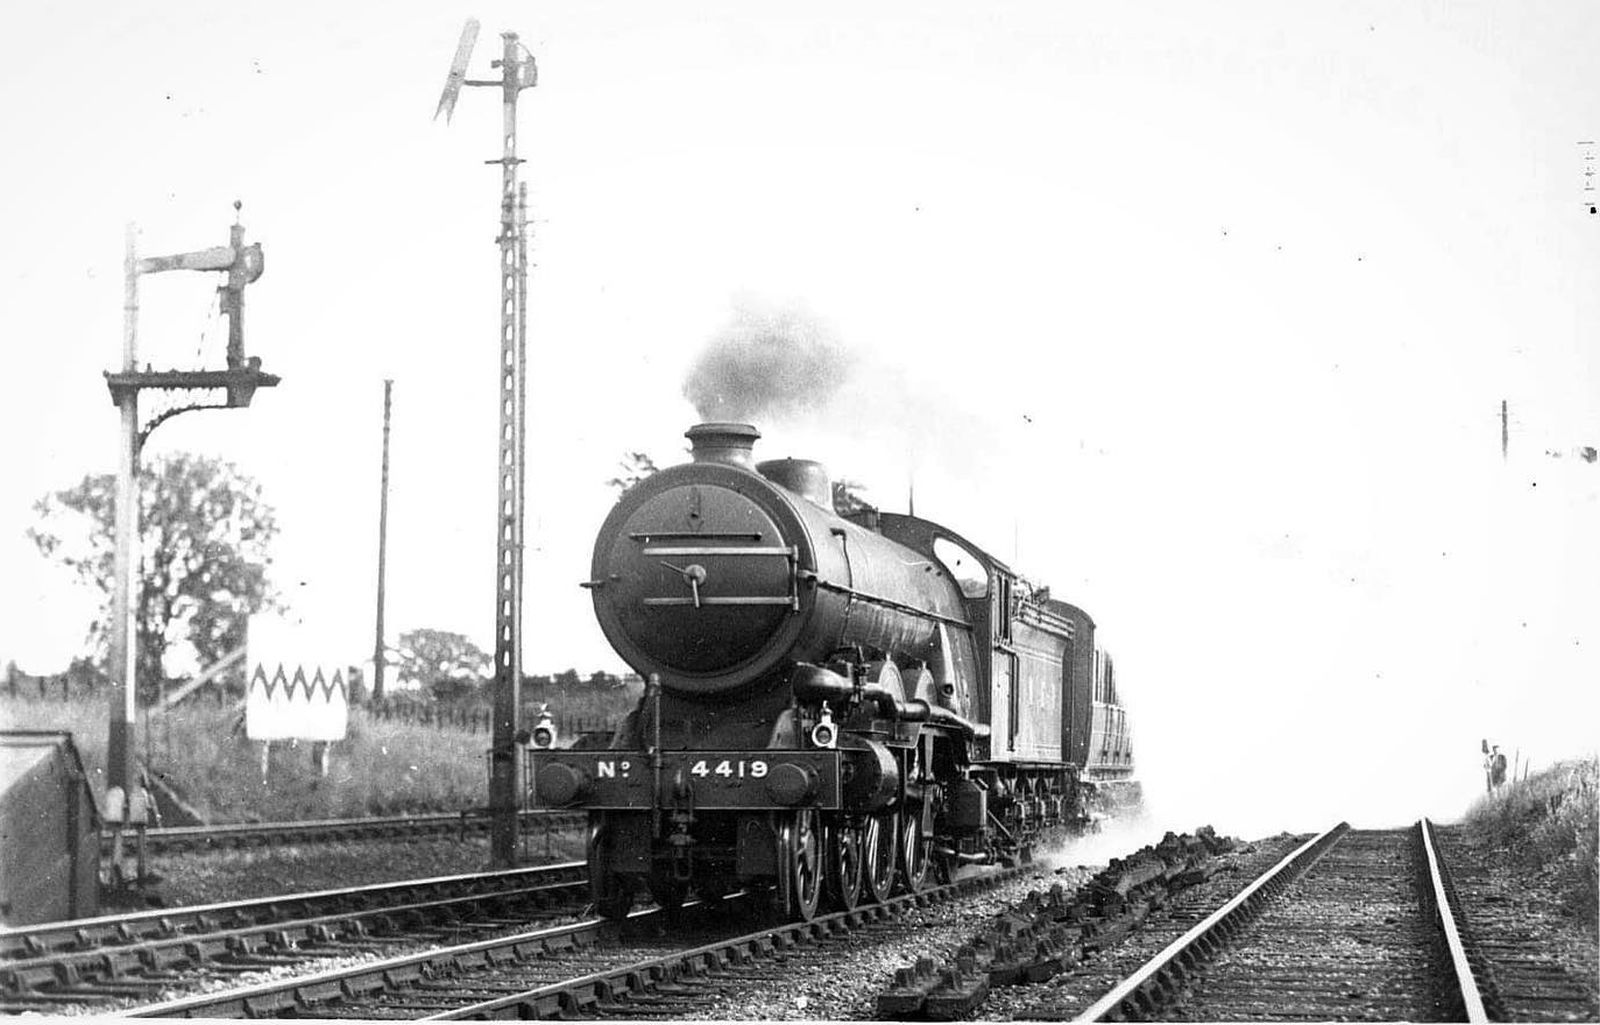 Heavy version of the C1 in LNER colors catching water at full speed